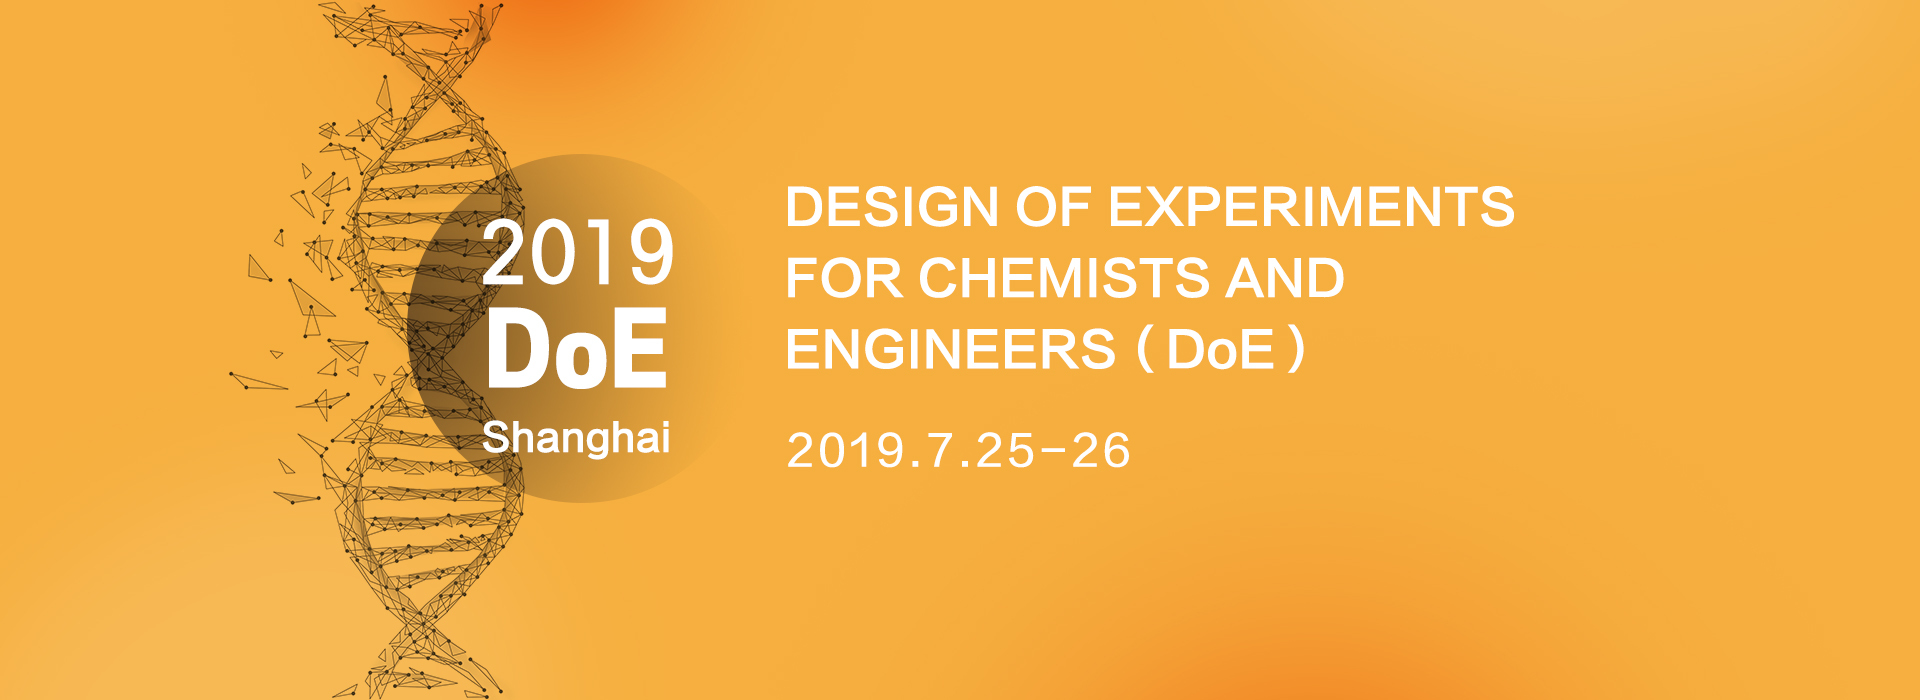 Design of Experiments for Chemists and Engineers(DoE)